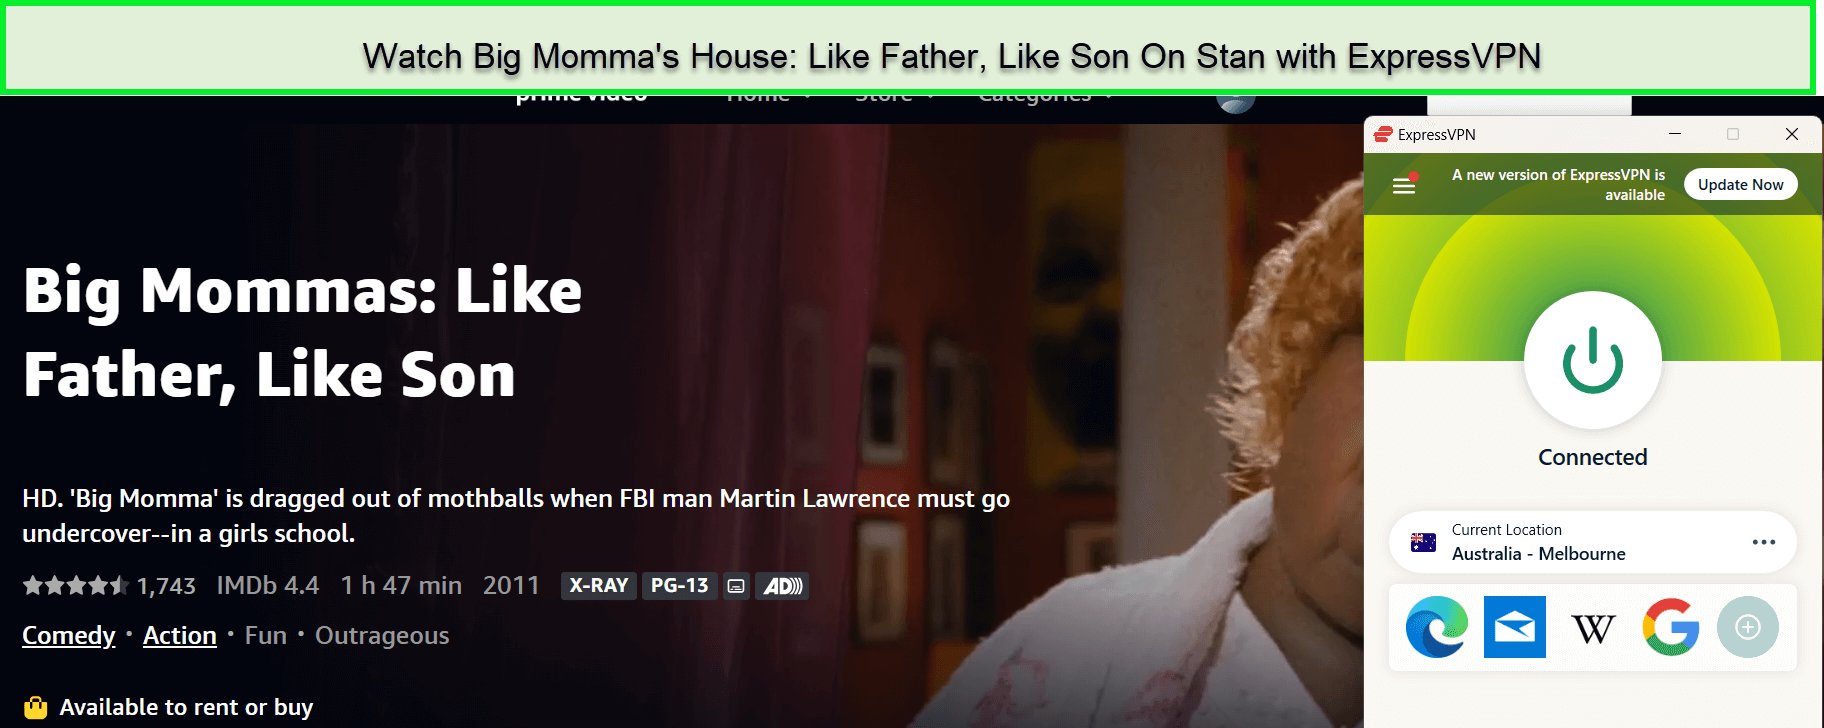 Watch Big Momma's House: Like Father, Like Son in-USA On Stan